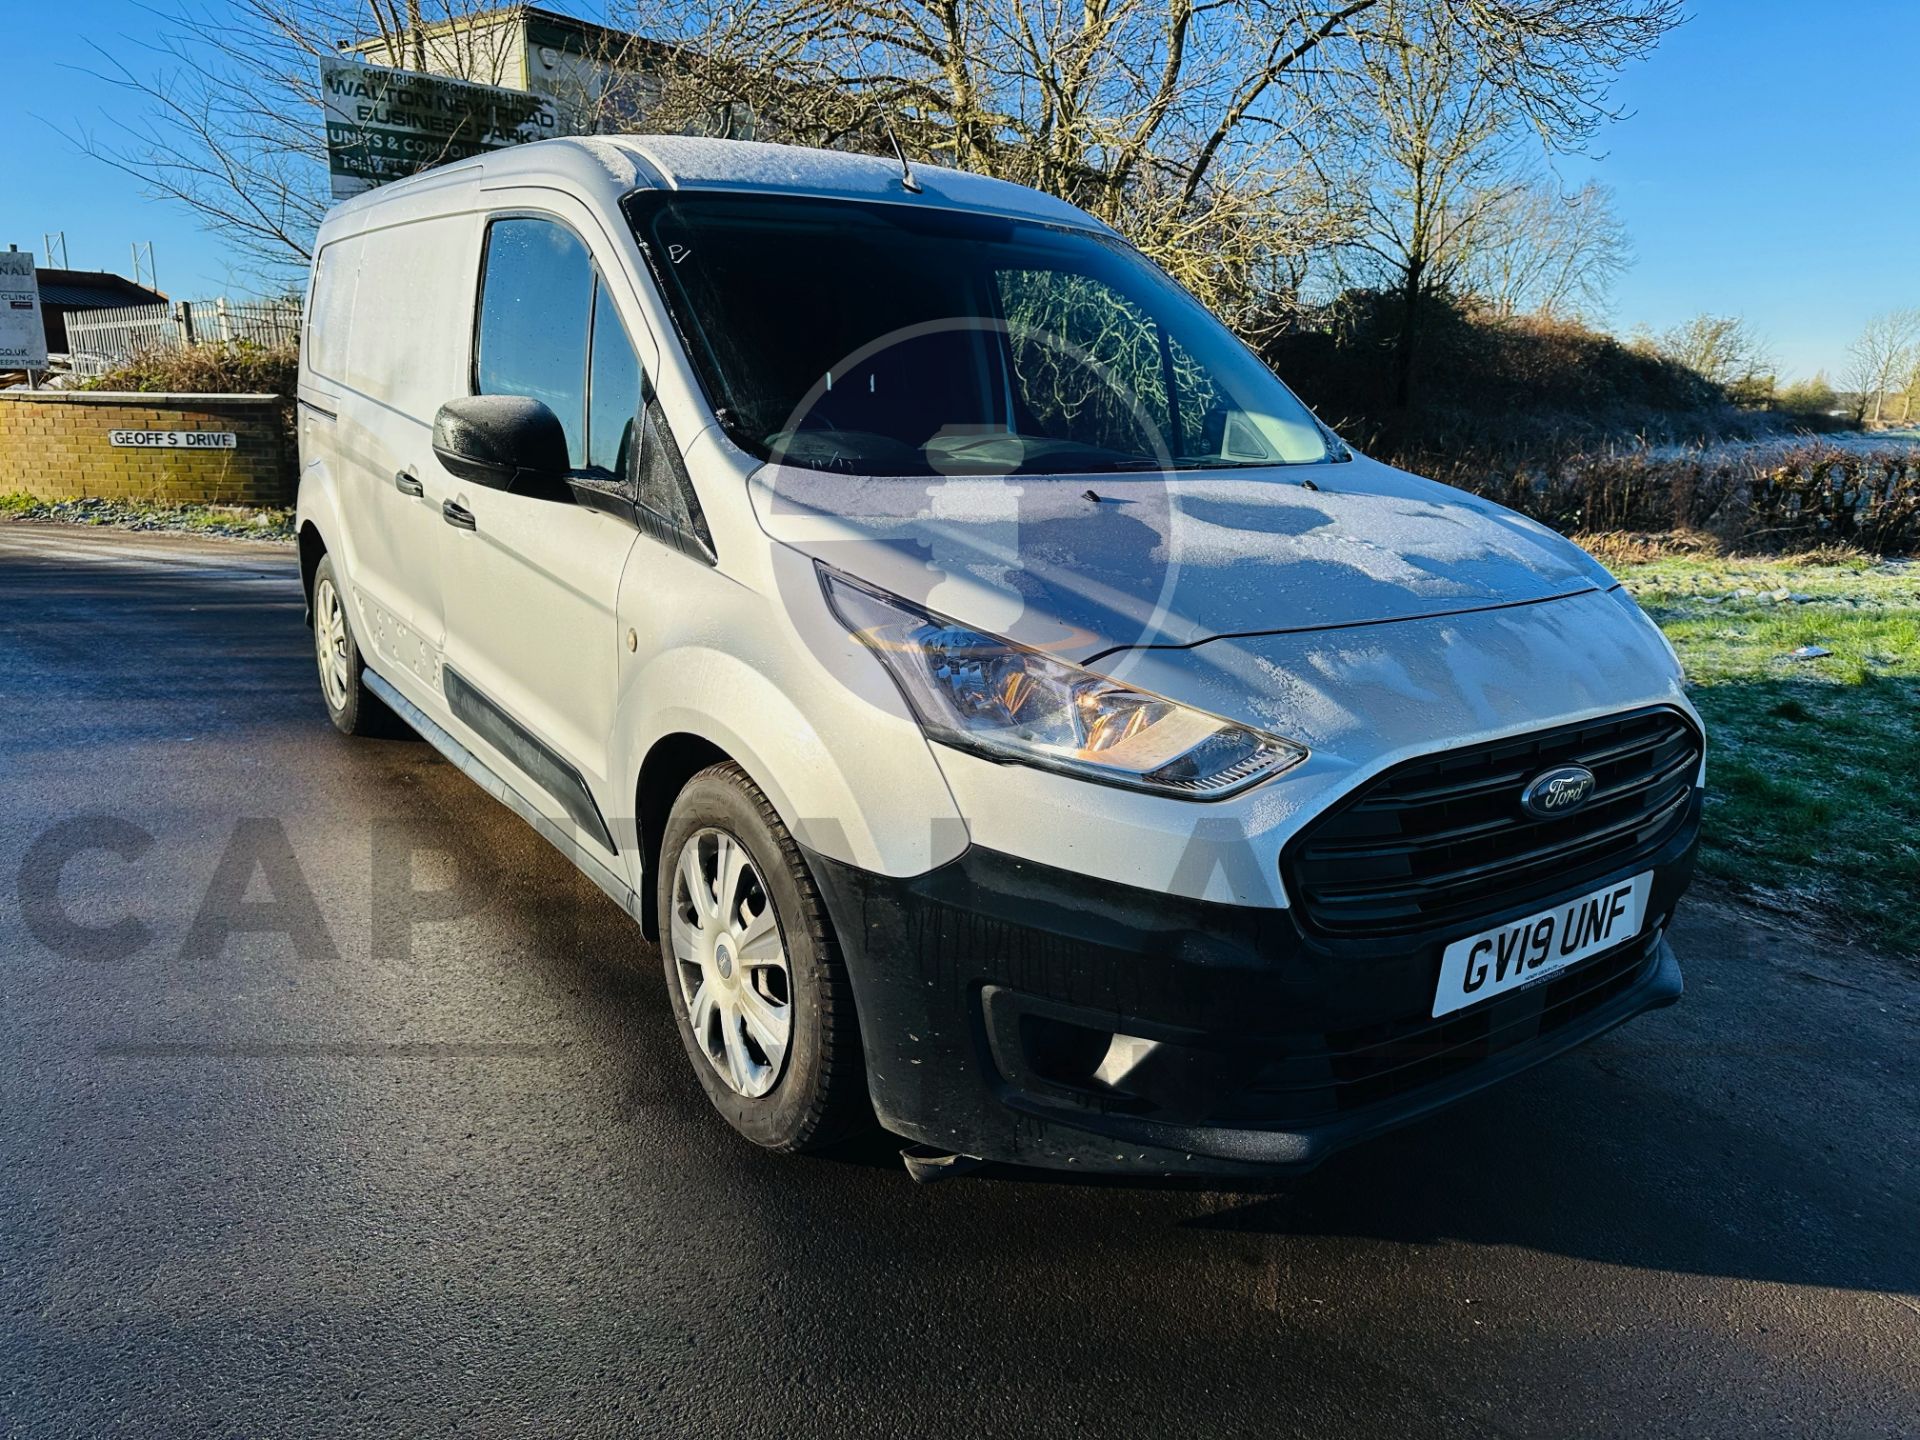 (ON SALE) FORD TRANSIT CONNECT 1.5 Tdci LWB 5 SEAT CREW VAN "EURO 6" - AIR CON - SILVER - 19 REG - Image 2 of 29